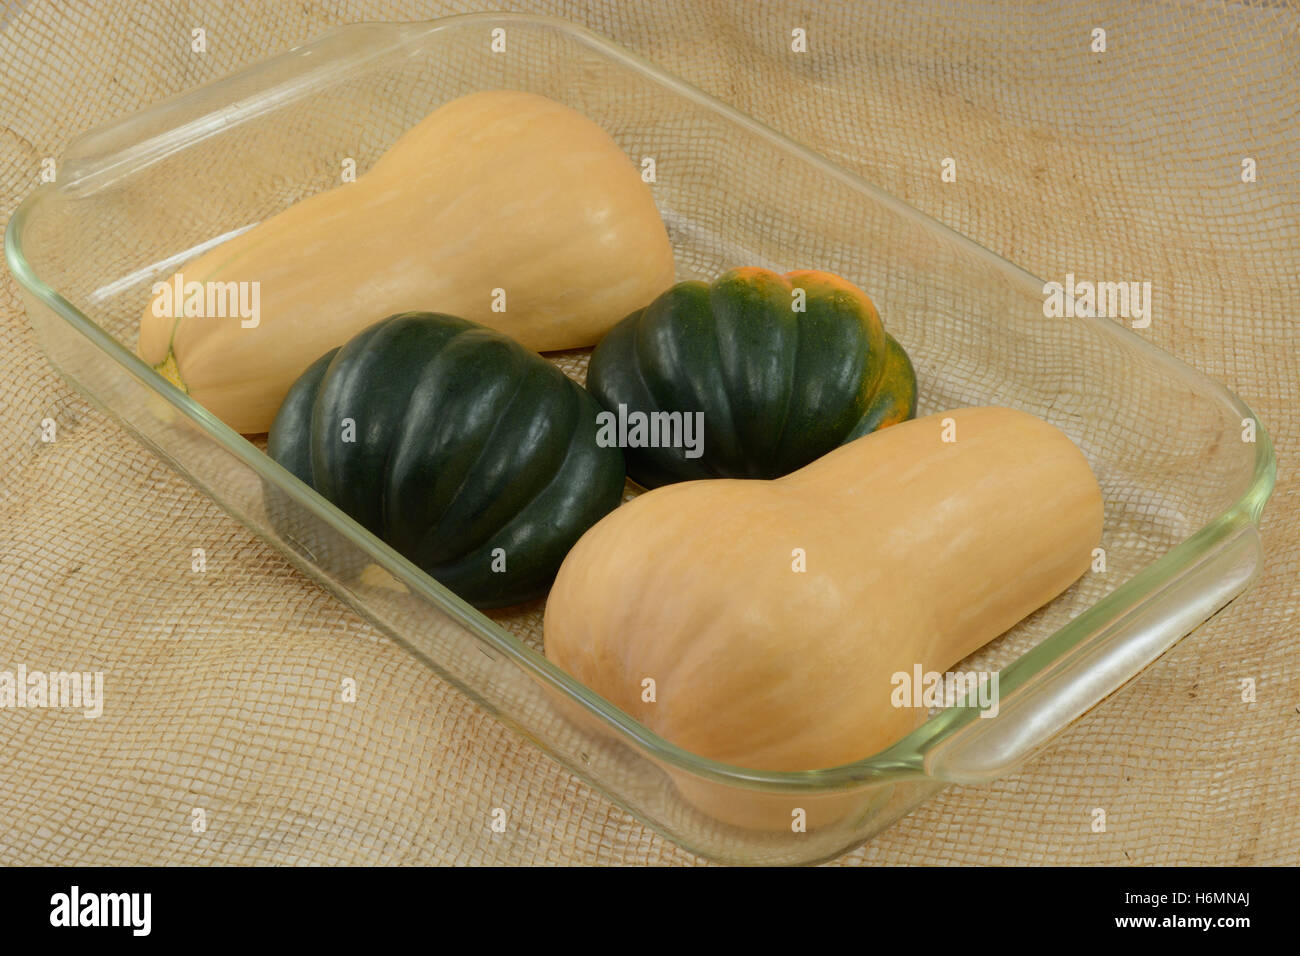 Raw uncooked acorn squash and butternut squash halves upside down in glass baking dish Stock Photo